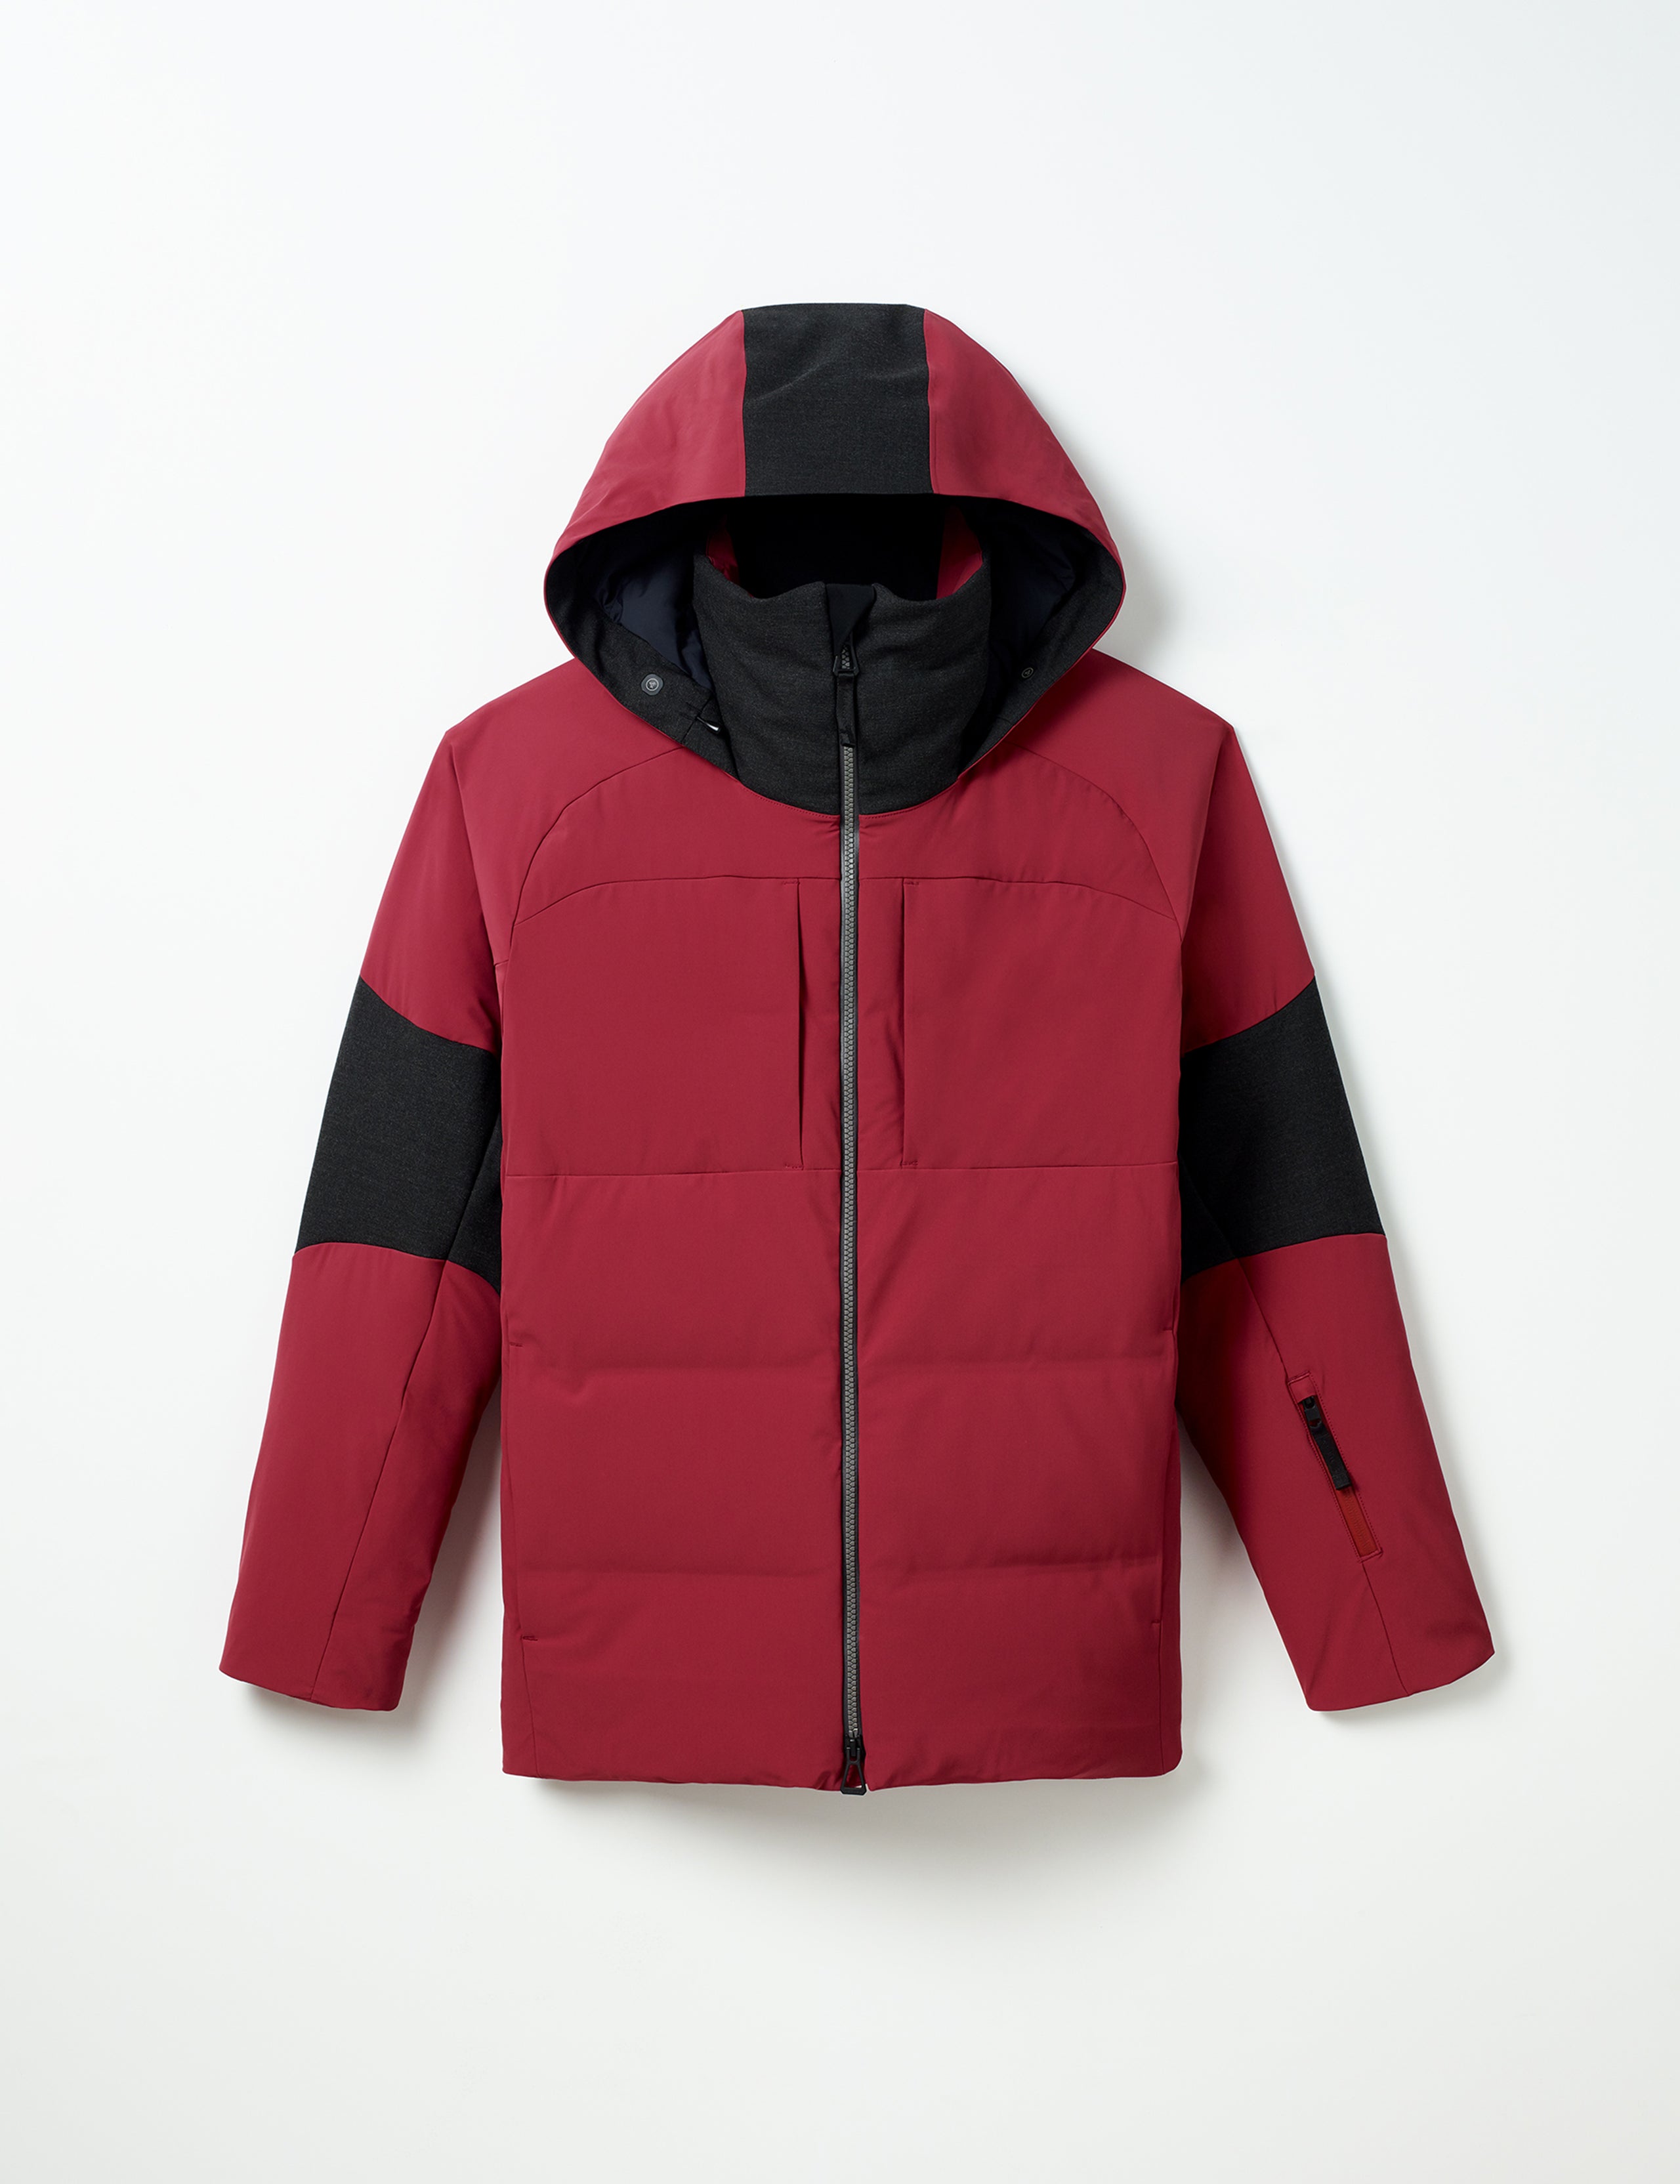 red ski jacket for men from Aether Apparel